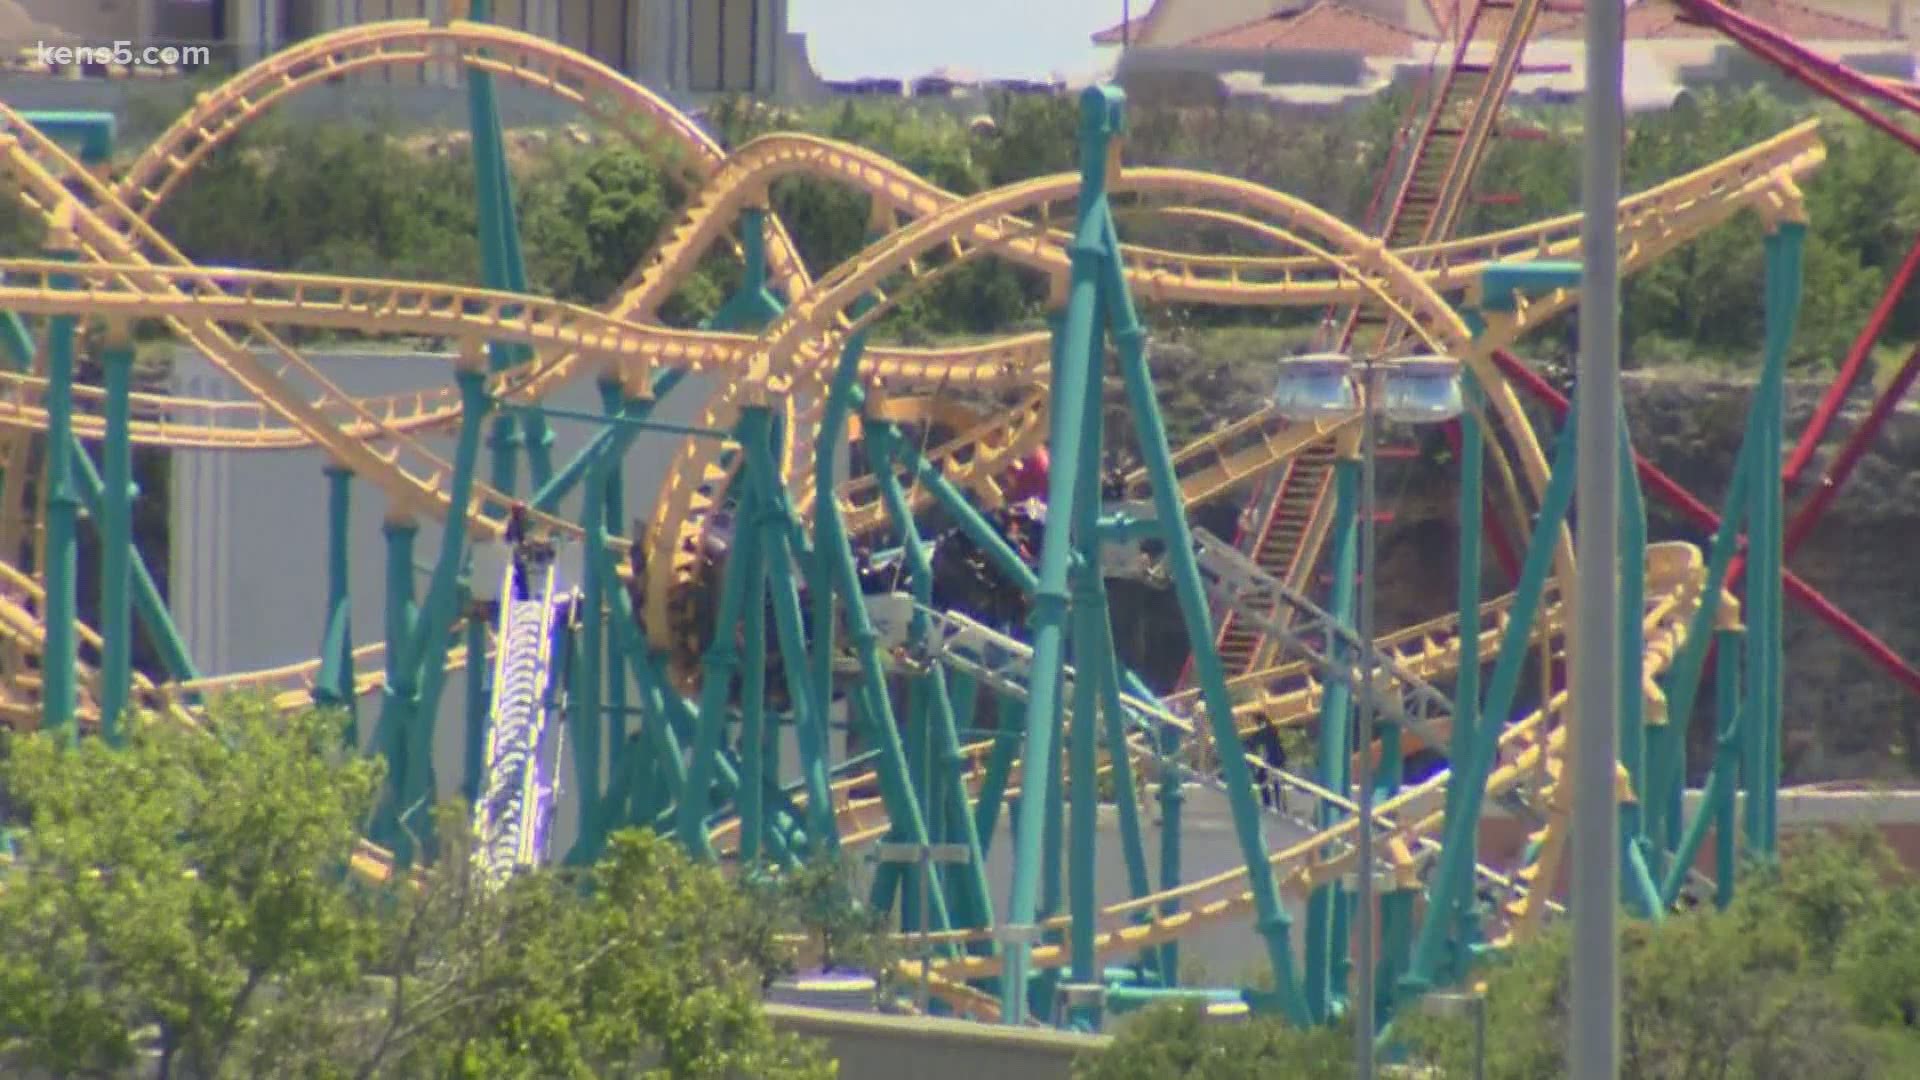 Park officials say they are shutting down the ride while an investigation is conducted.